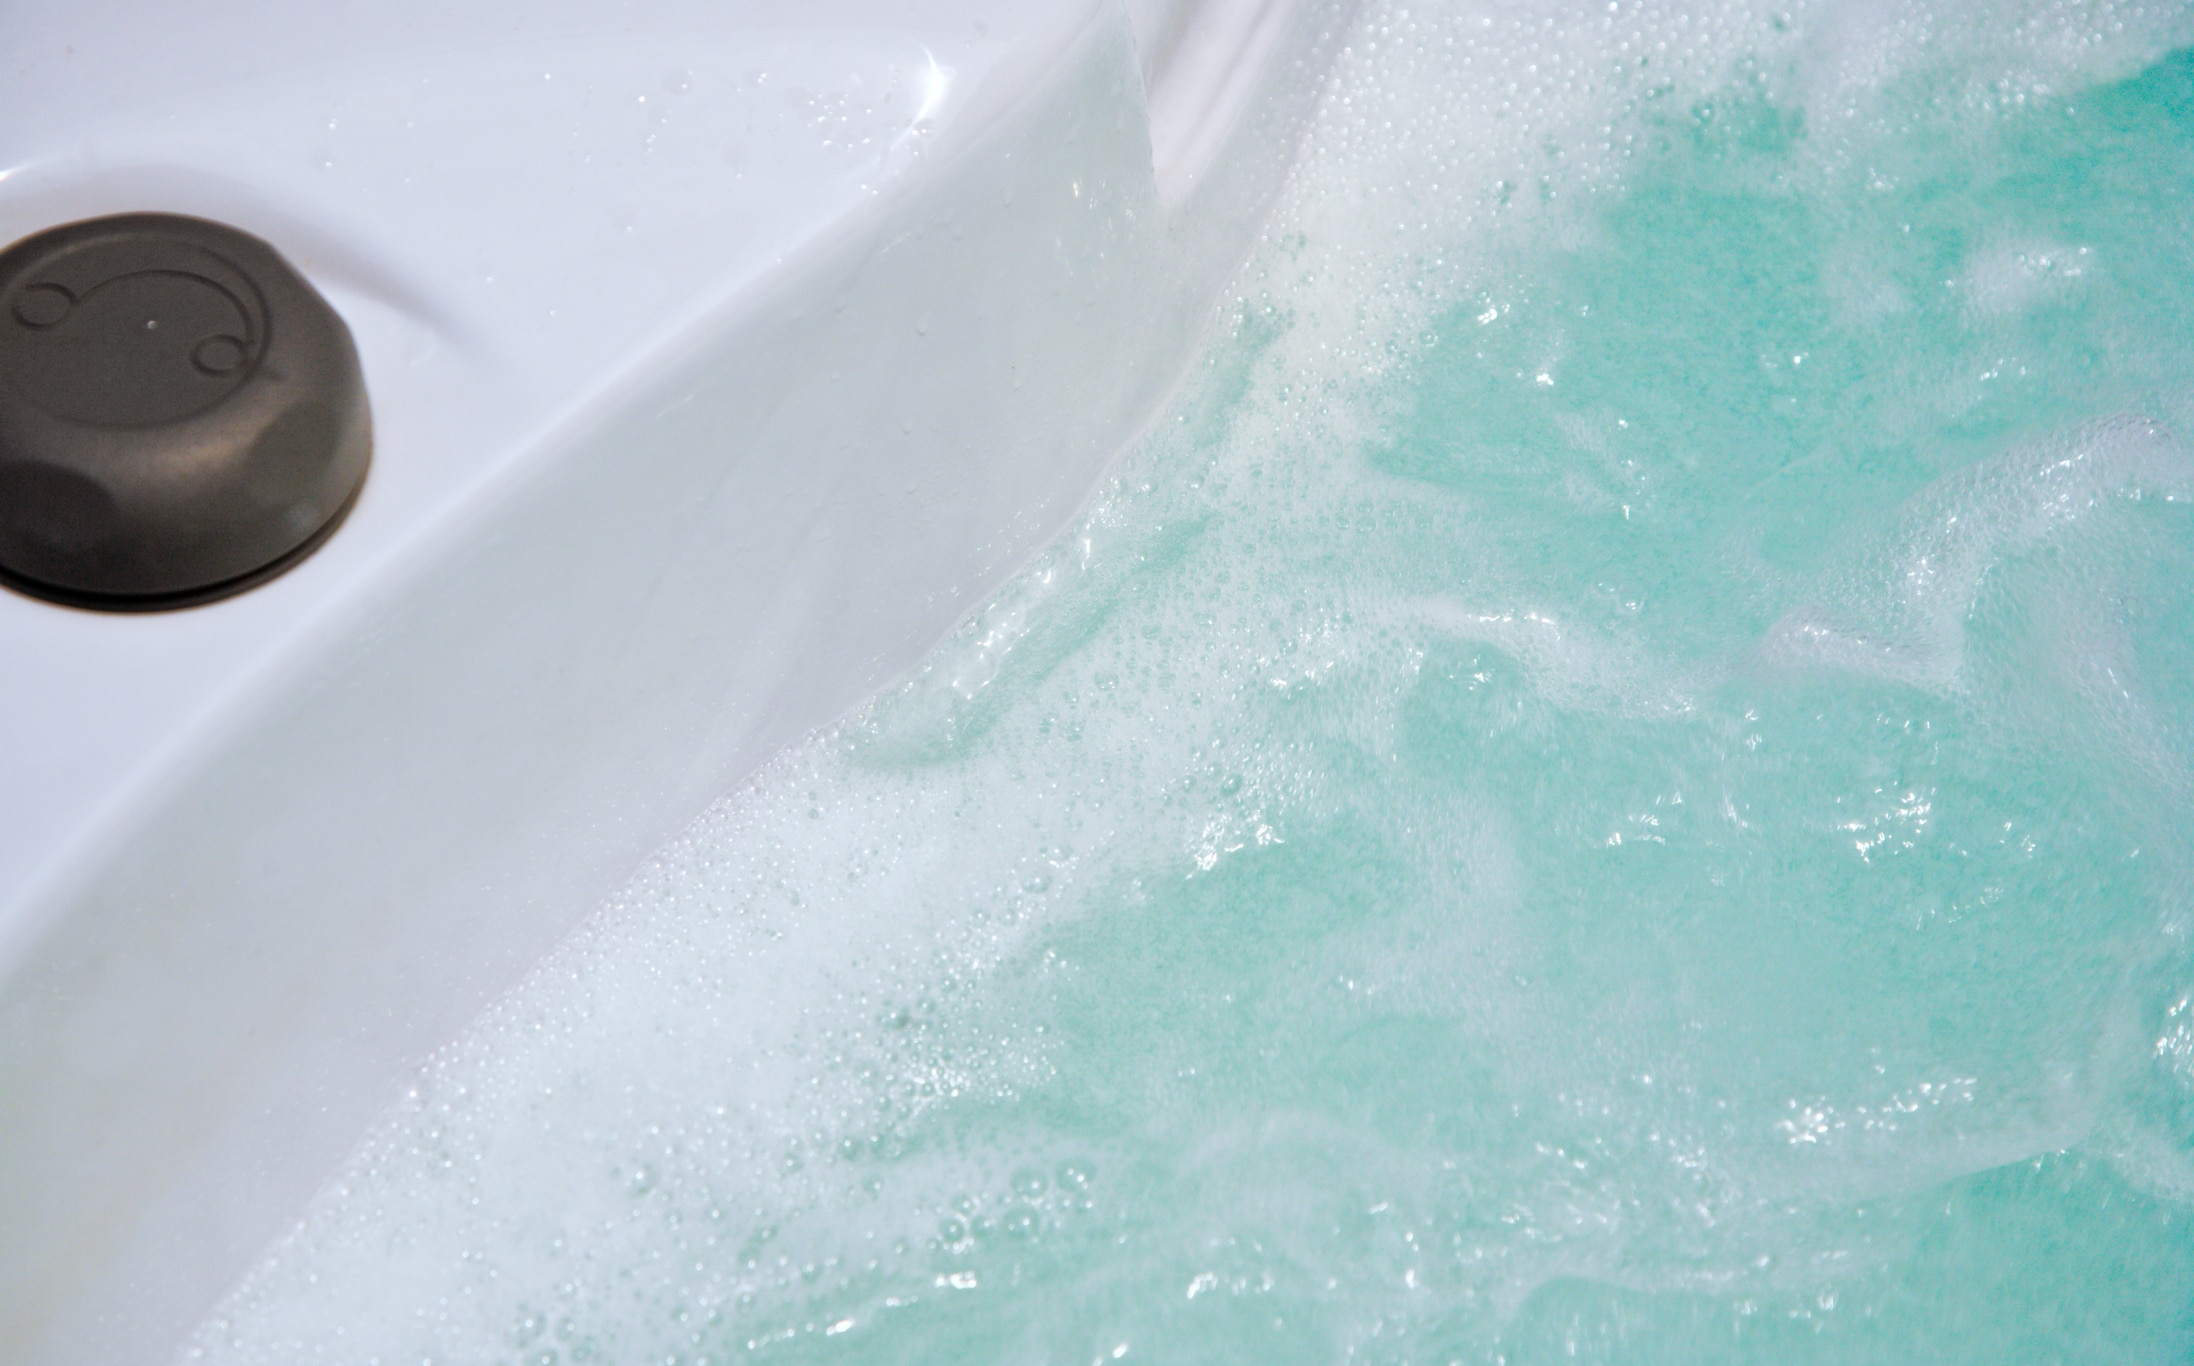 foamy water is a sign it's time to purge your hot tub